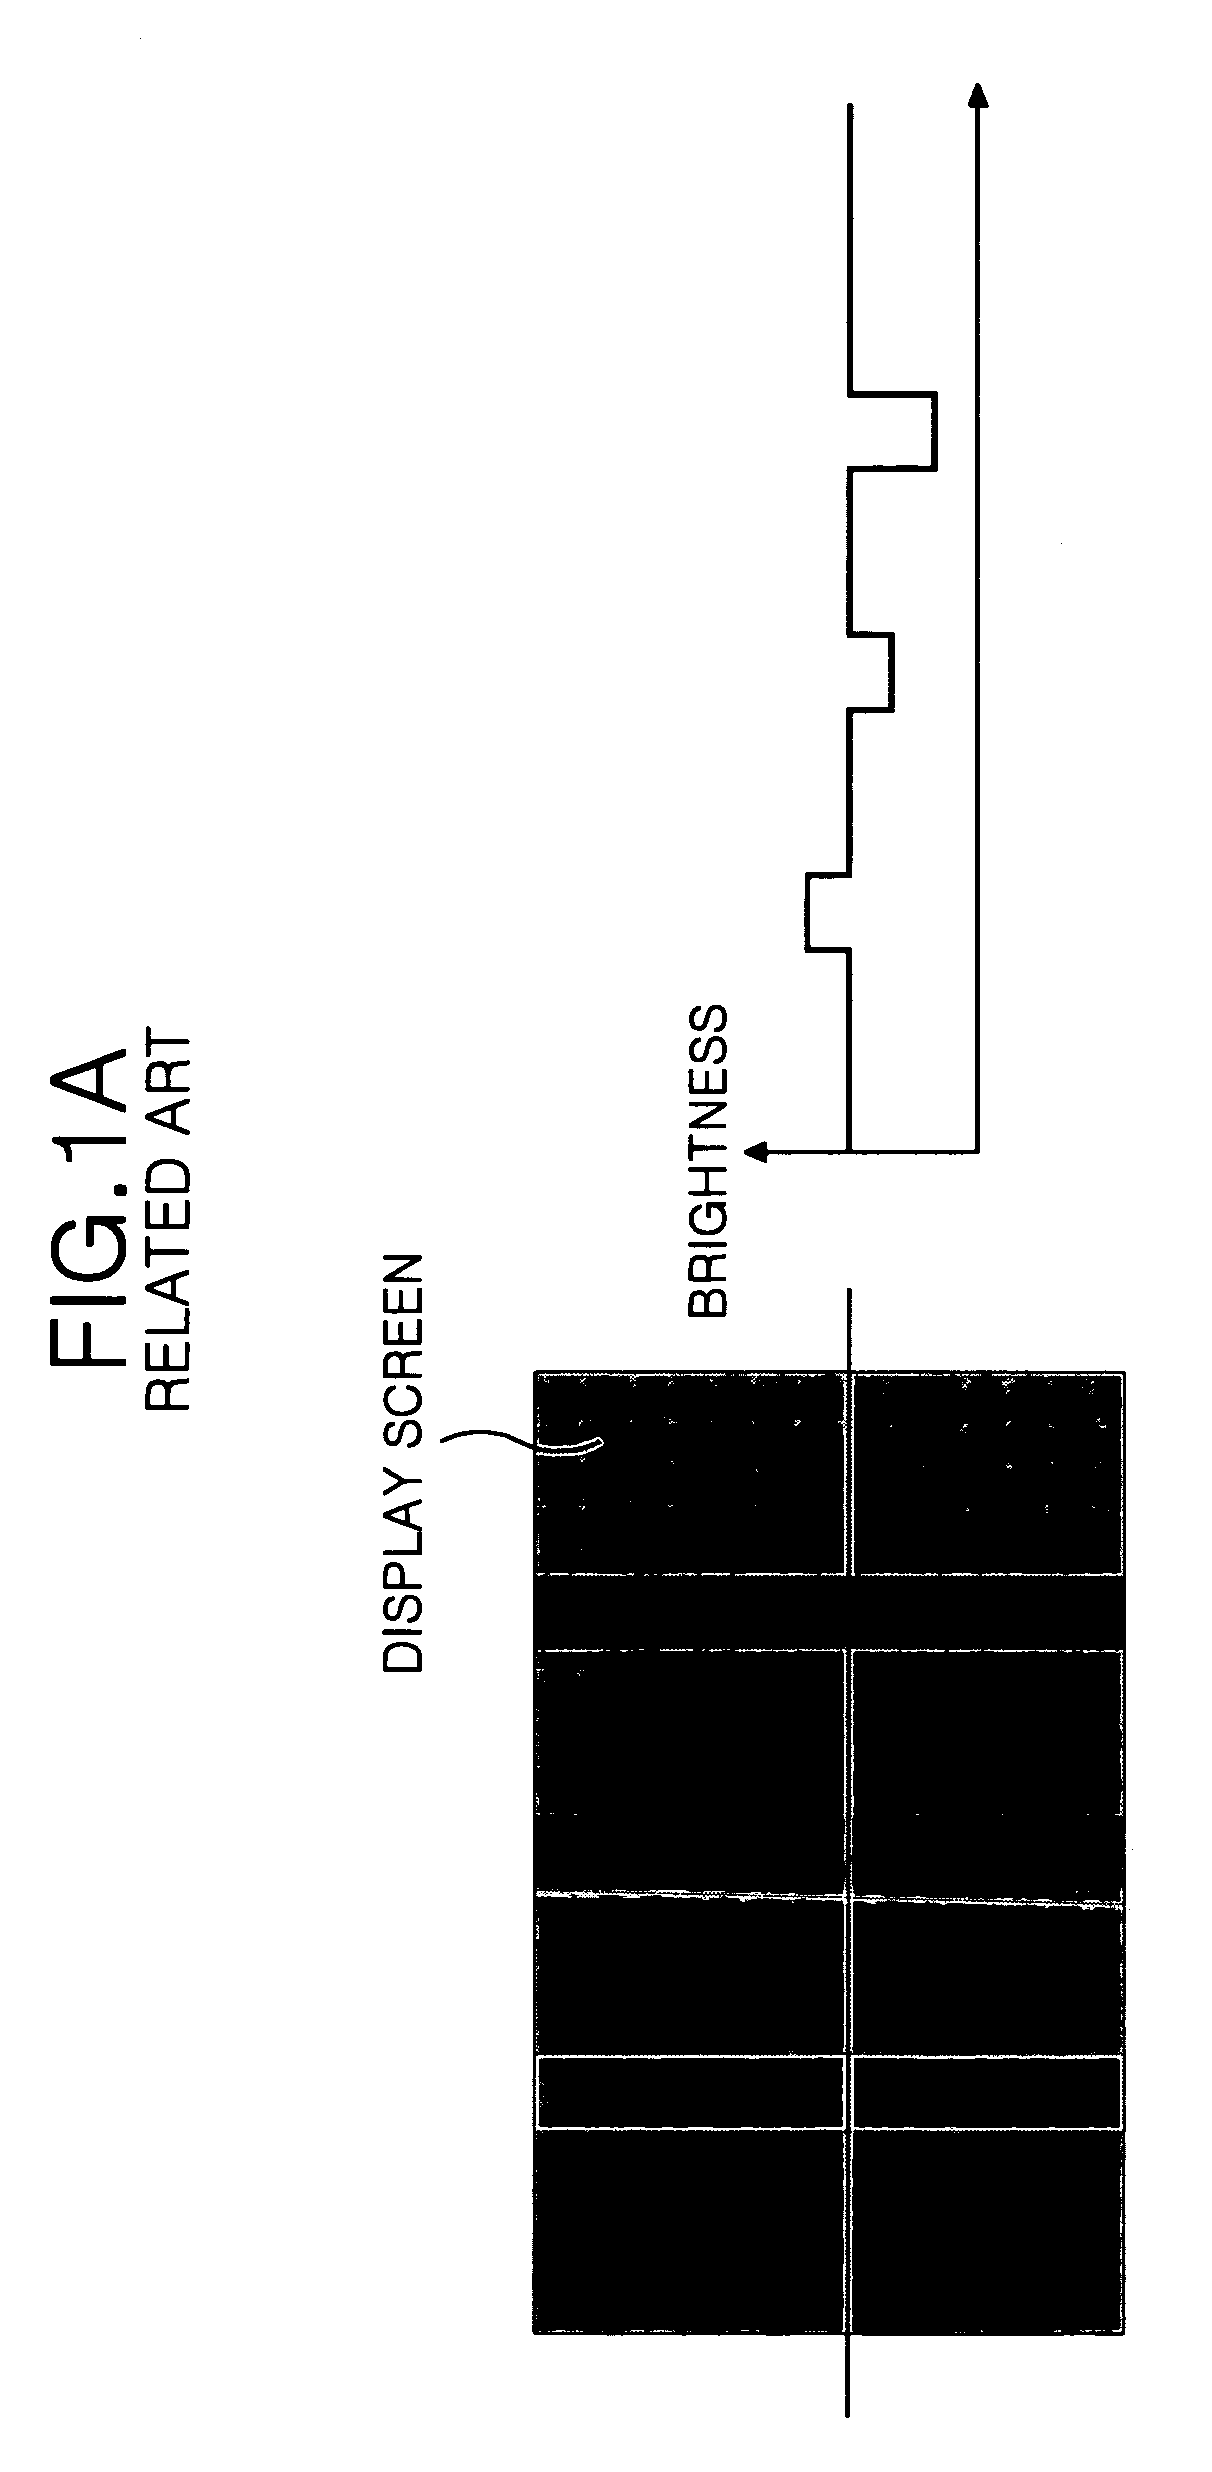 Flat display apparatus, fabricating method, picture quality controlling method and apparatus thereof